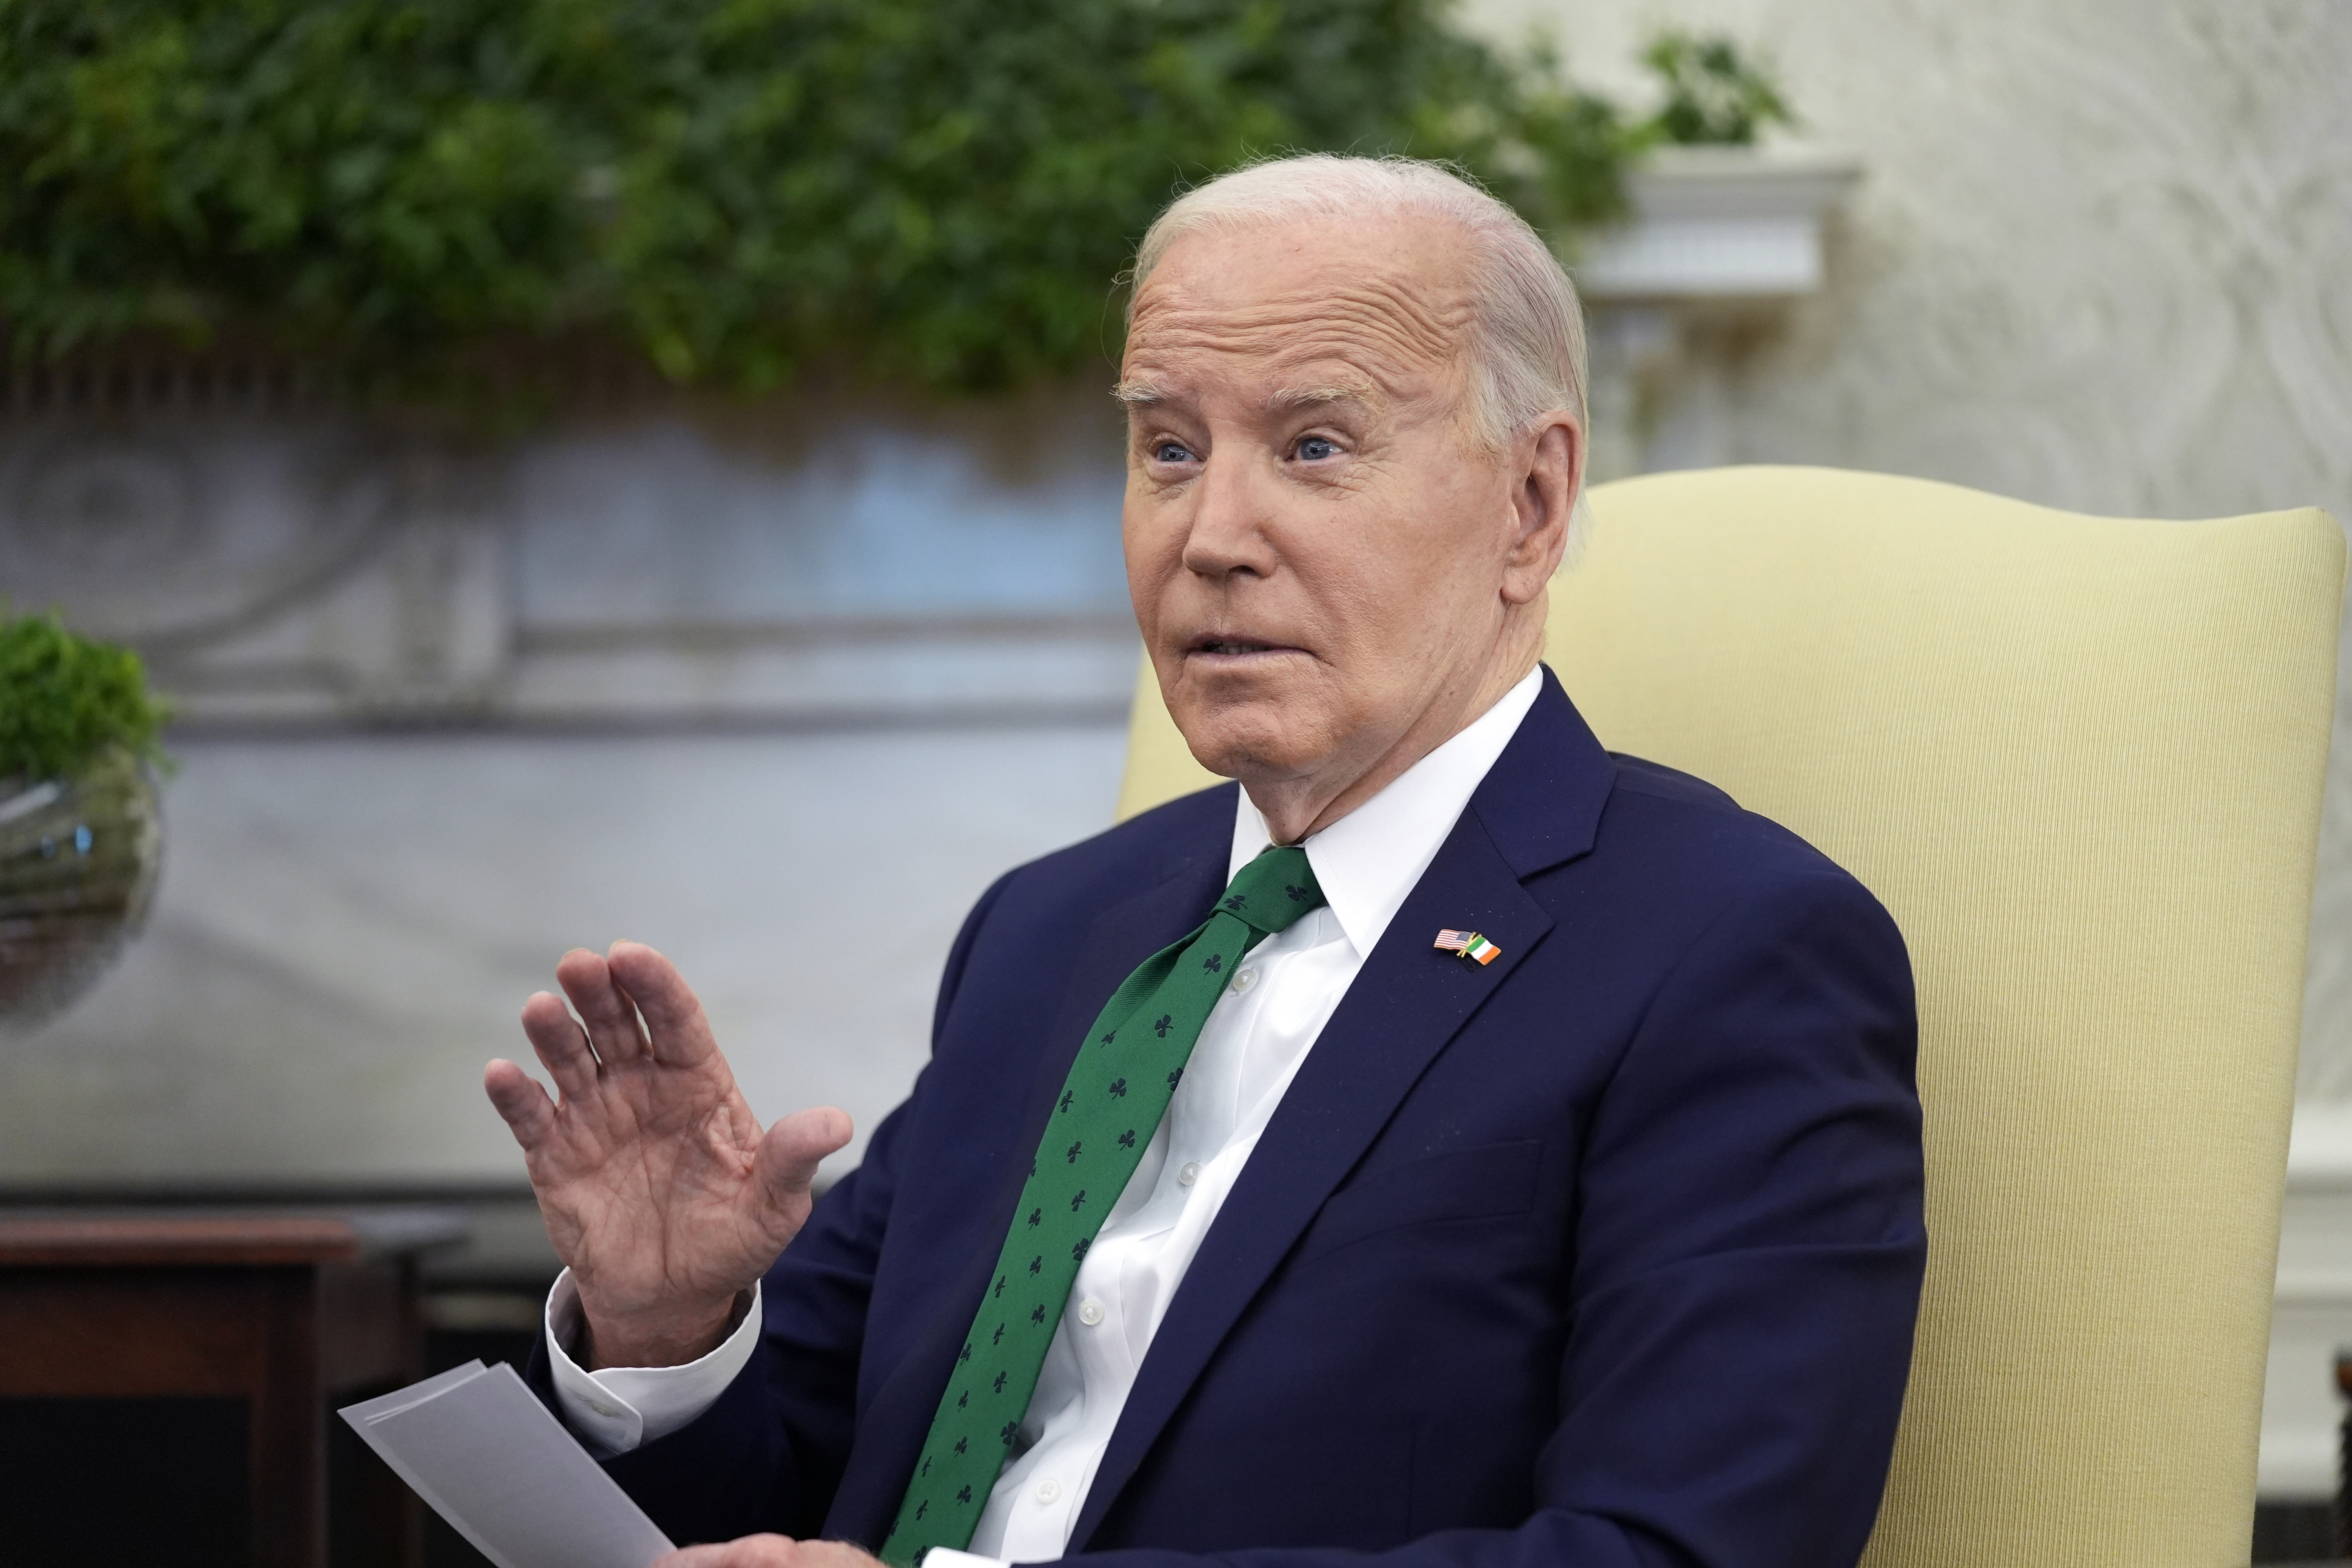 Biden Backs Schumer After He Calls for New Israel Elections